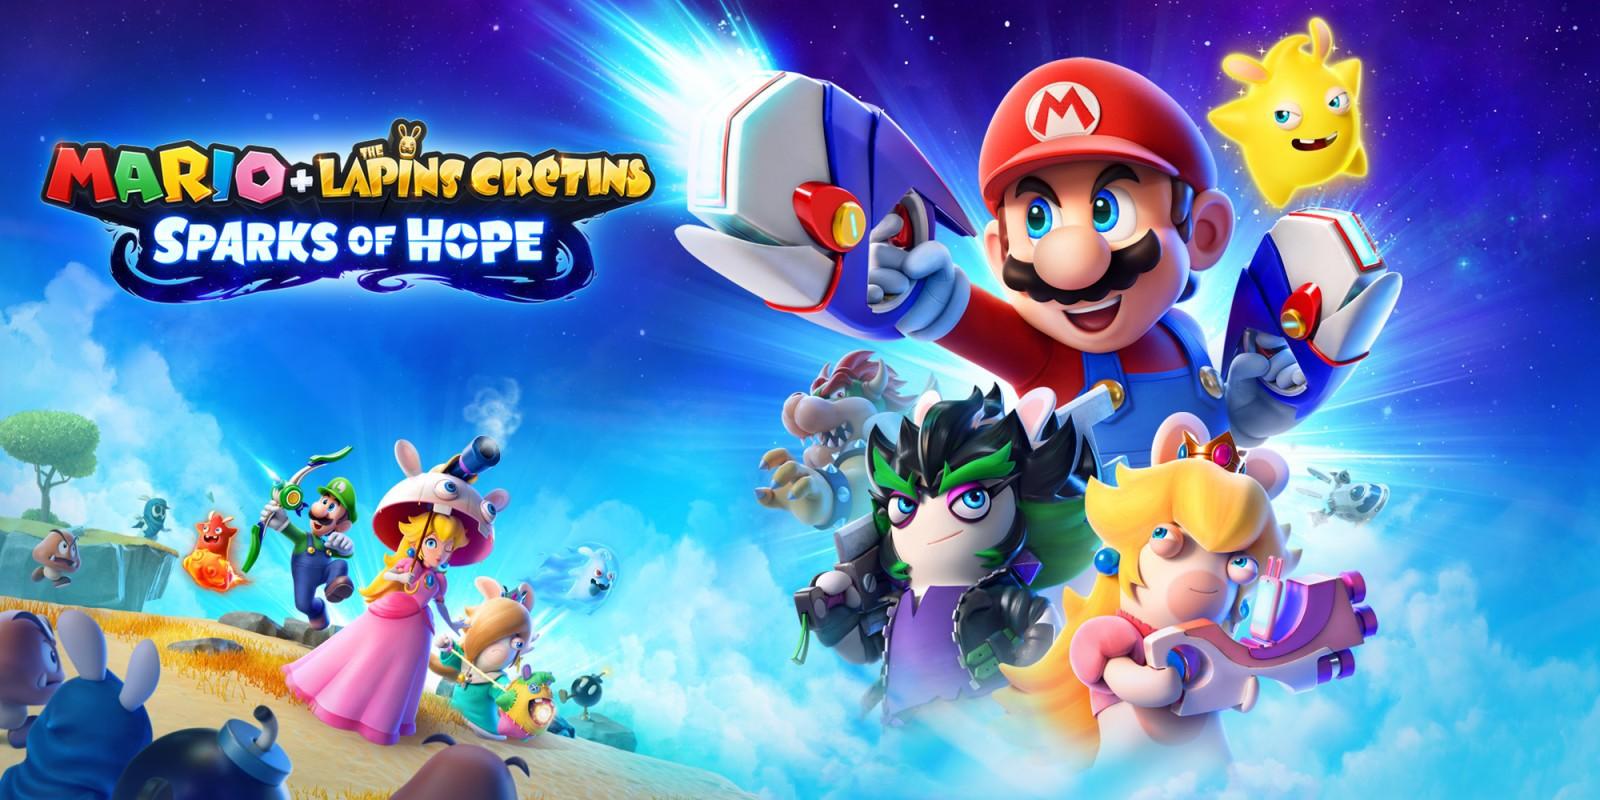 Mario + The Lapins Crétins® Sparks of Hope